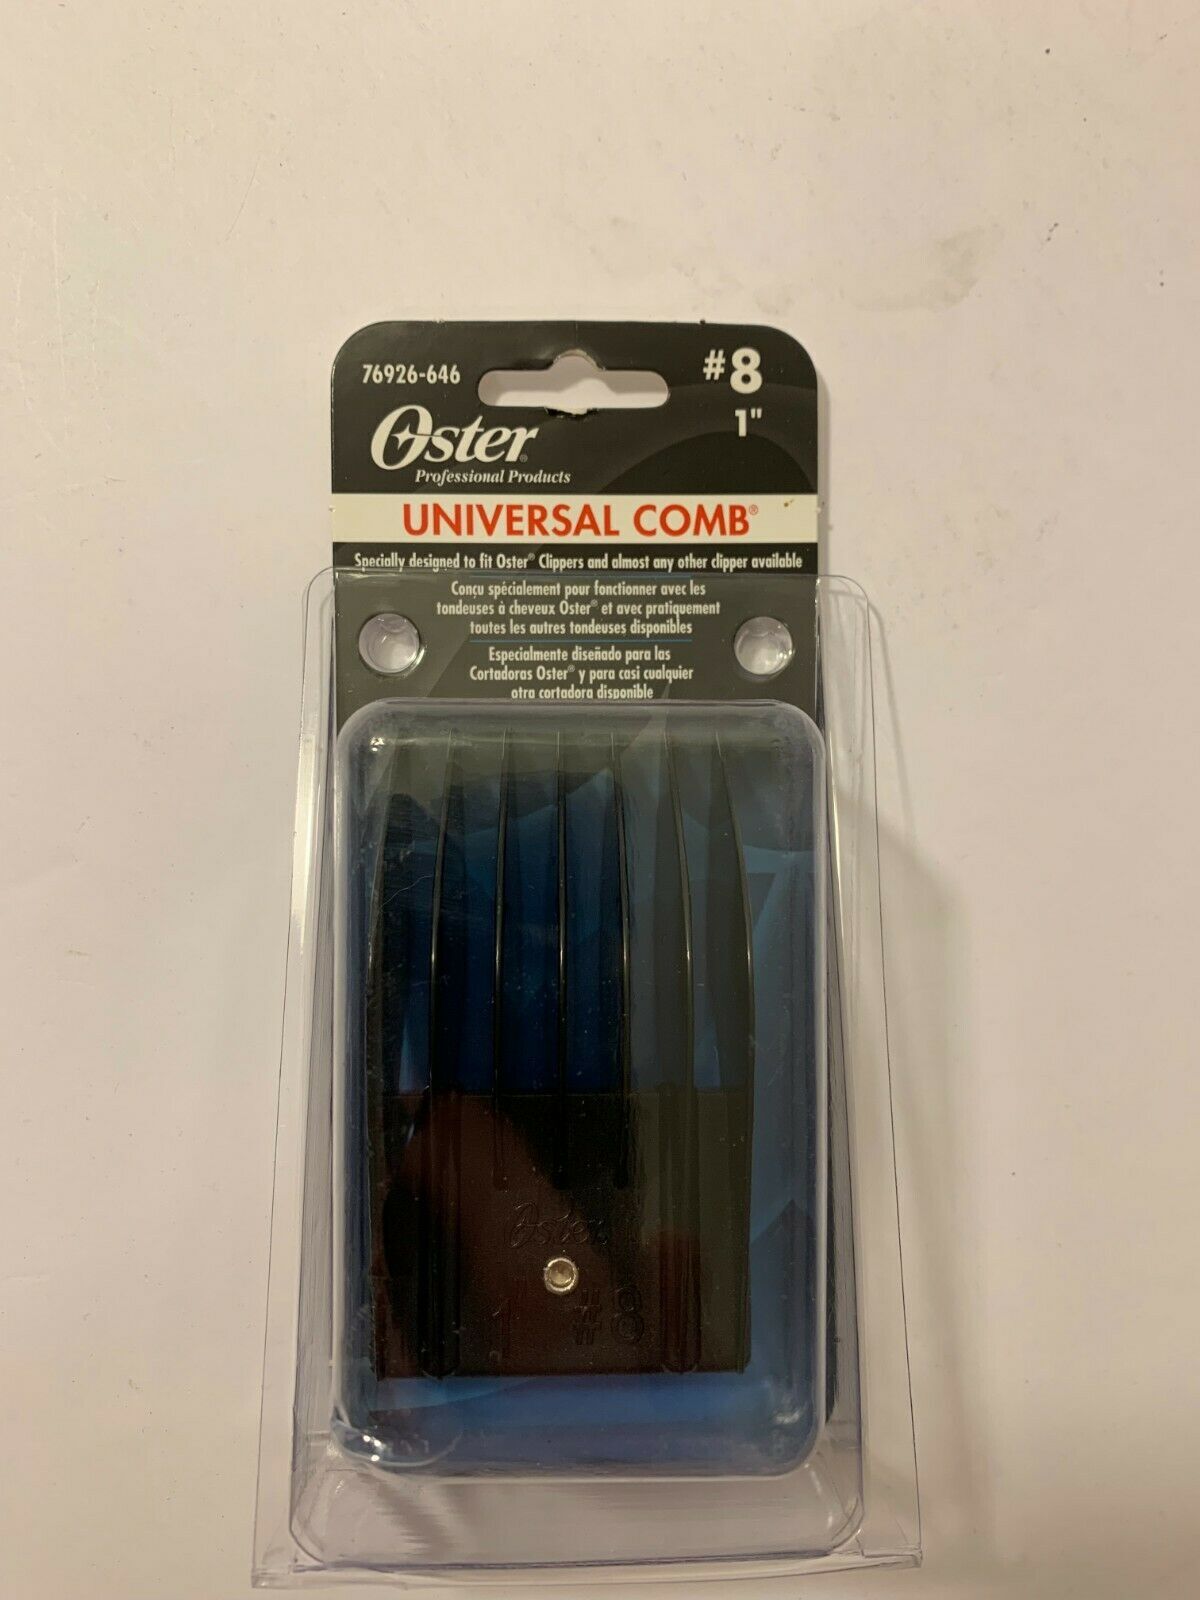 Oster Universal Comb Attachments #, 1